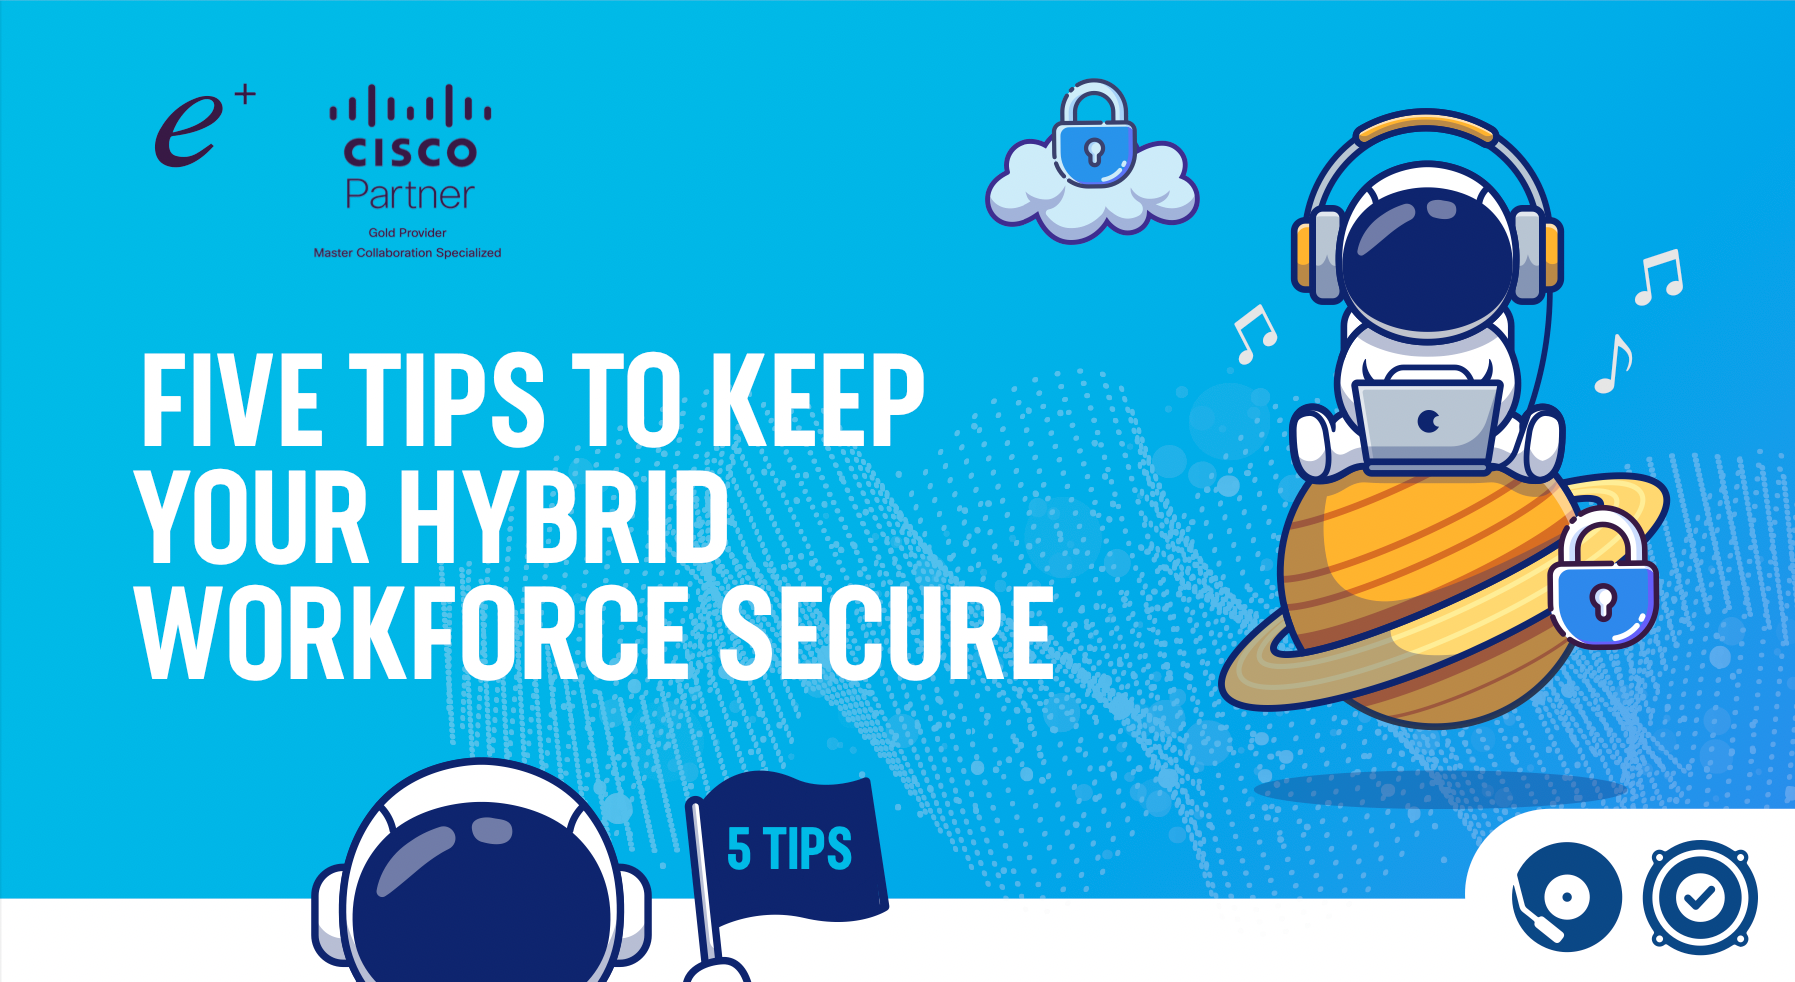 Five Tips to Keep Your Hybrid Workforce Secure